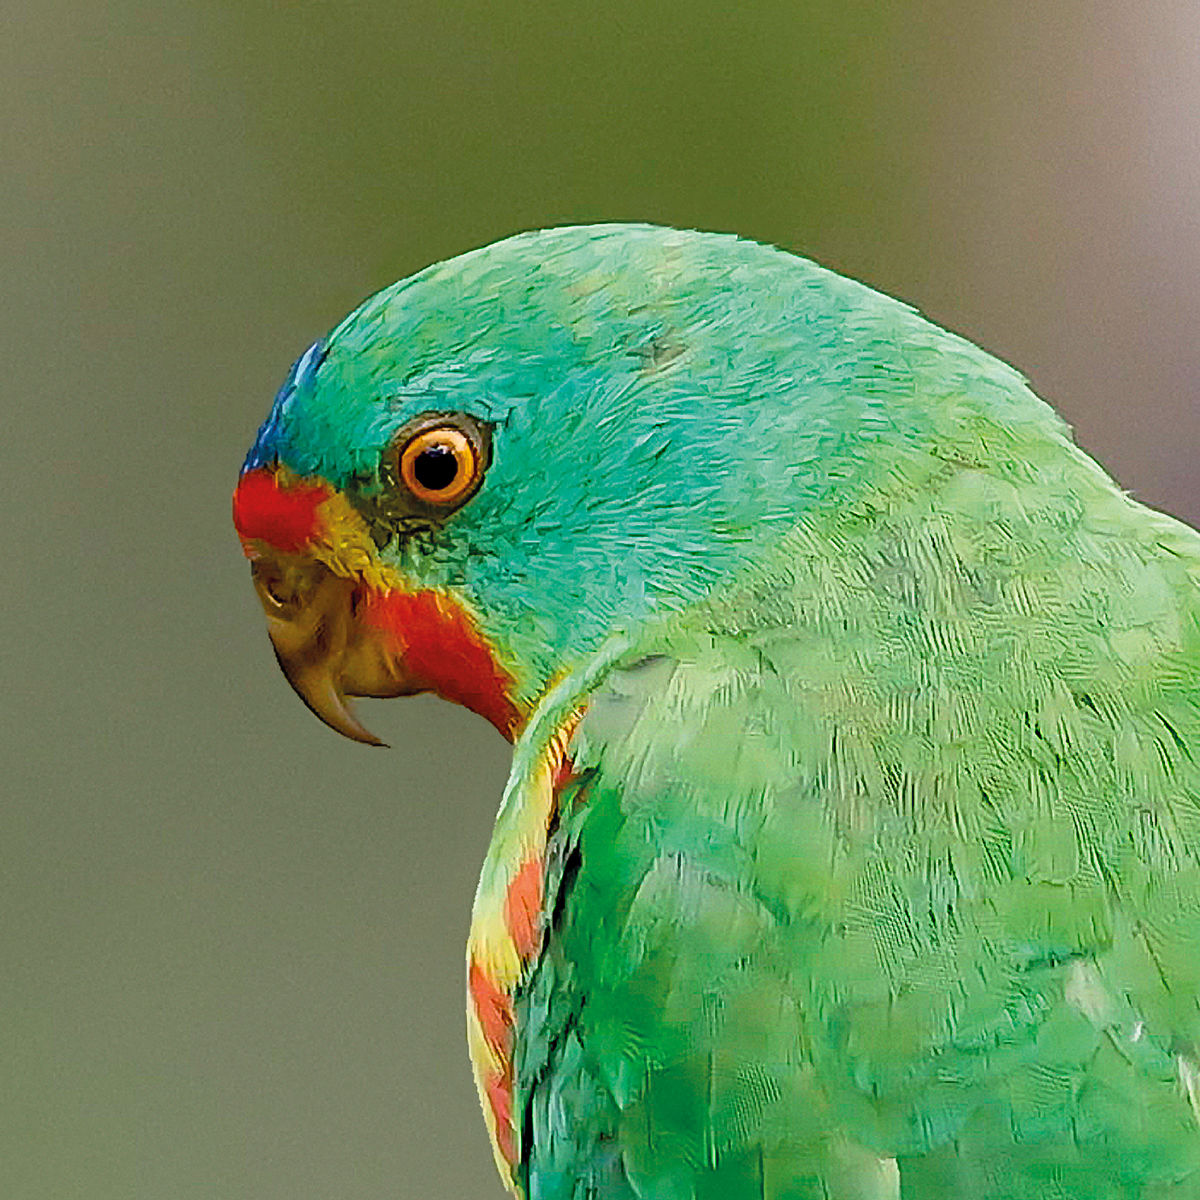 A close up of an adult Swift Parrot’s head showing its vibrant red, yellow  and green colouring, its powerful hooked beak and yellow-ringed black eye. Image by Rob Blakers.